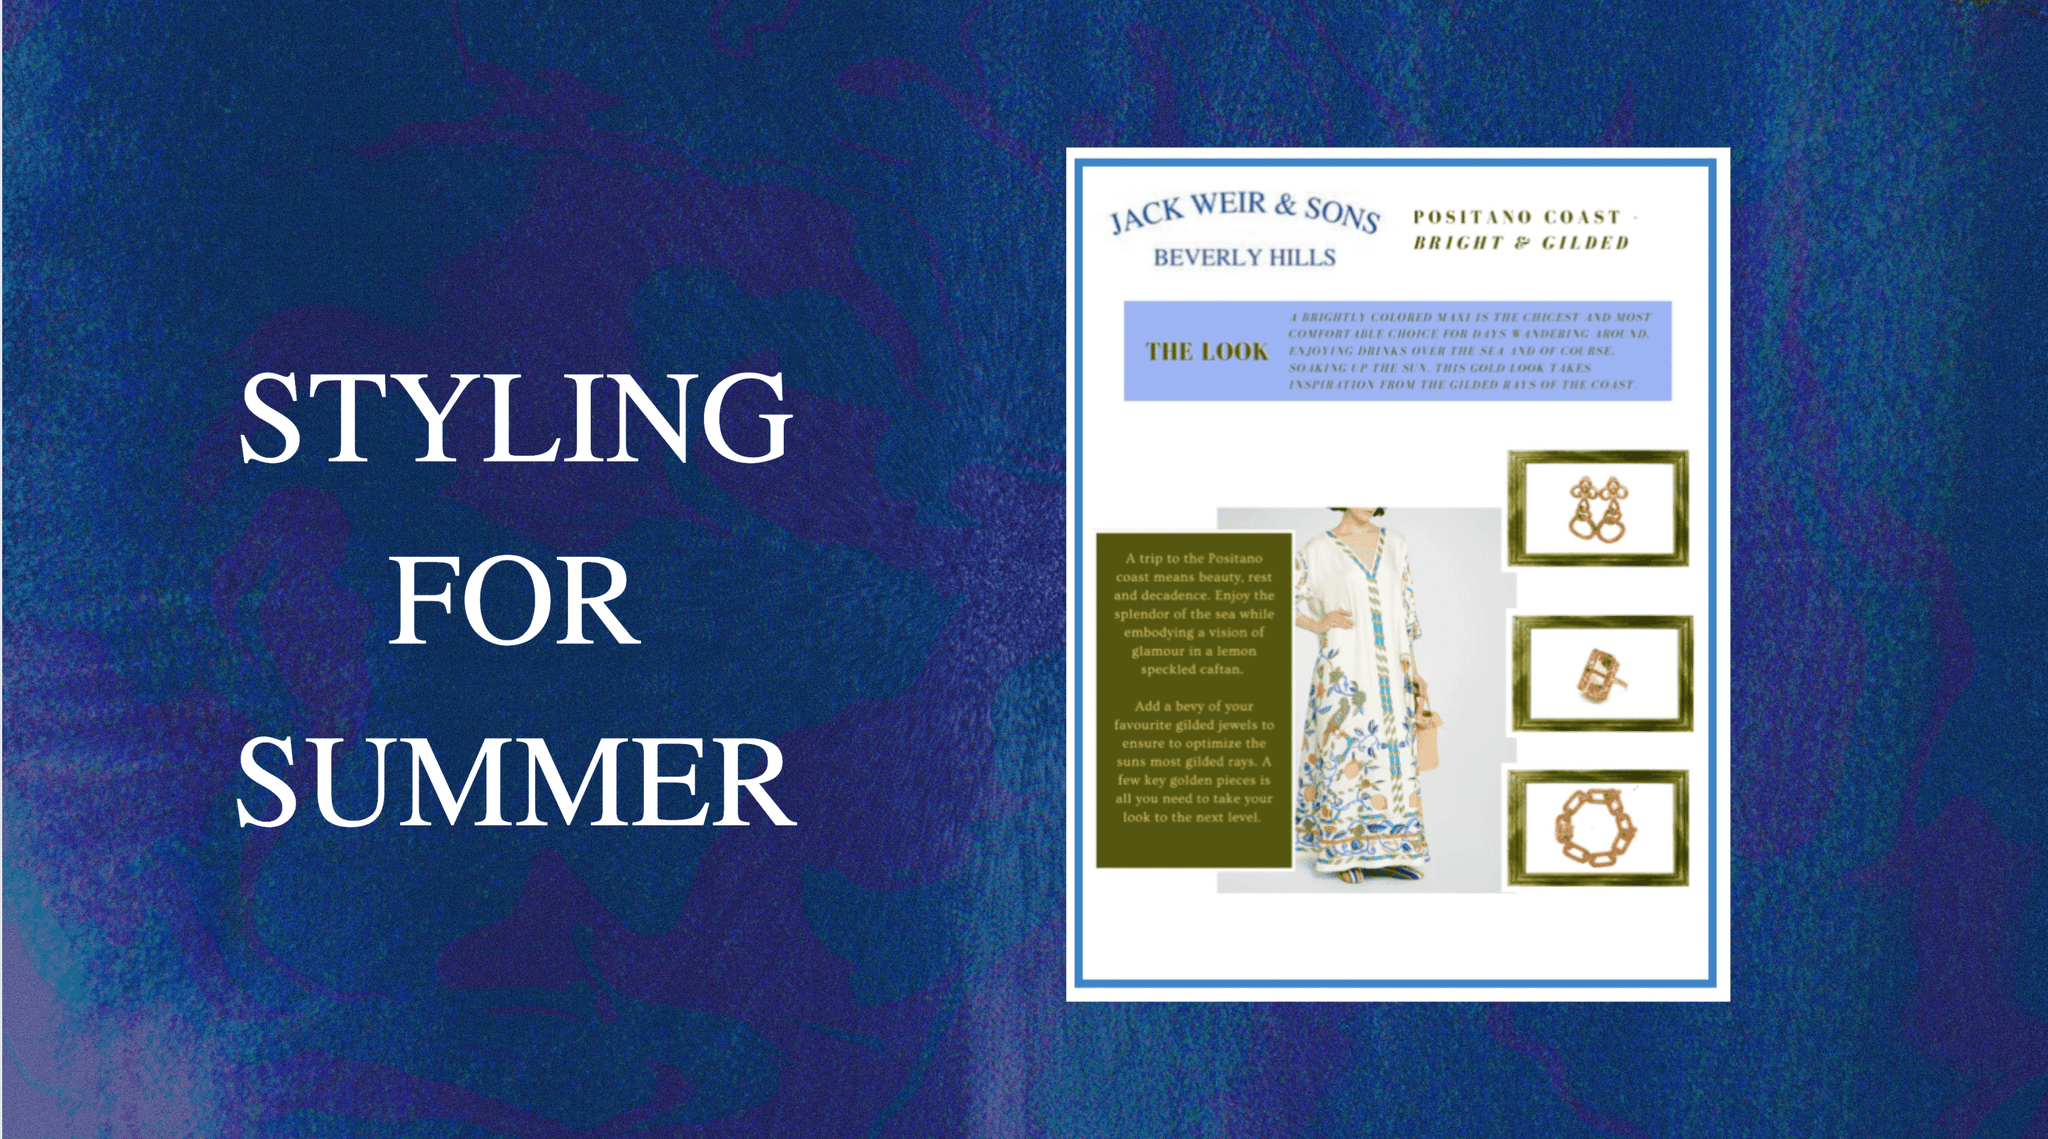 Styling for Summer - Jack Weir & Sons